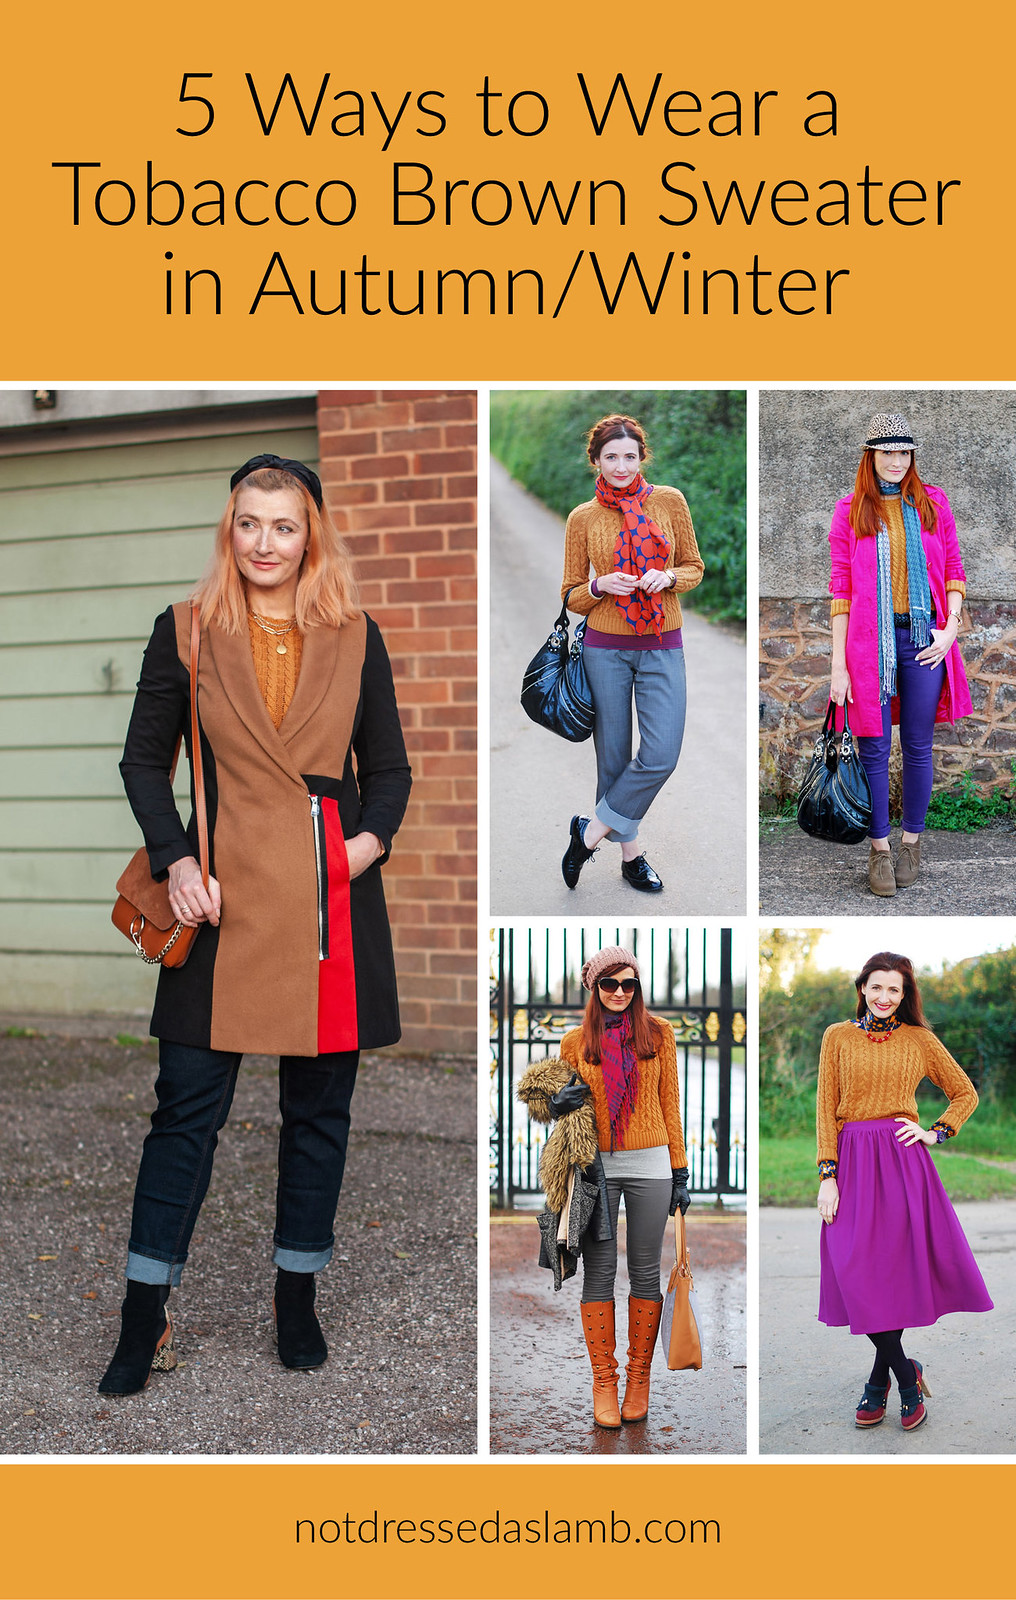 5 Ways to Wear an Autumnal Brown Sweater | Not Dressed As Lamb, Over 40 Fashion and Style